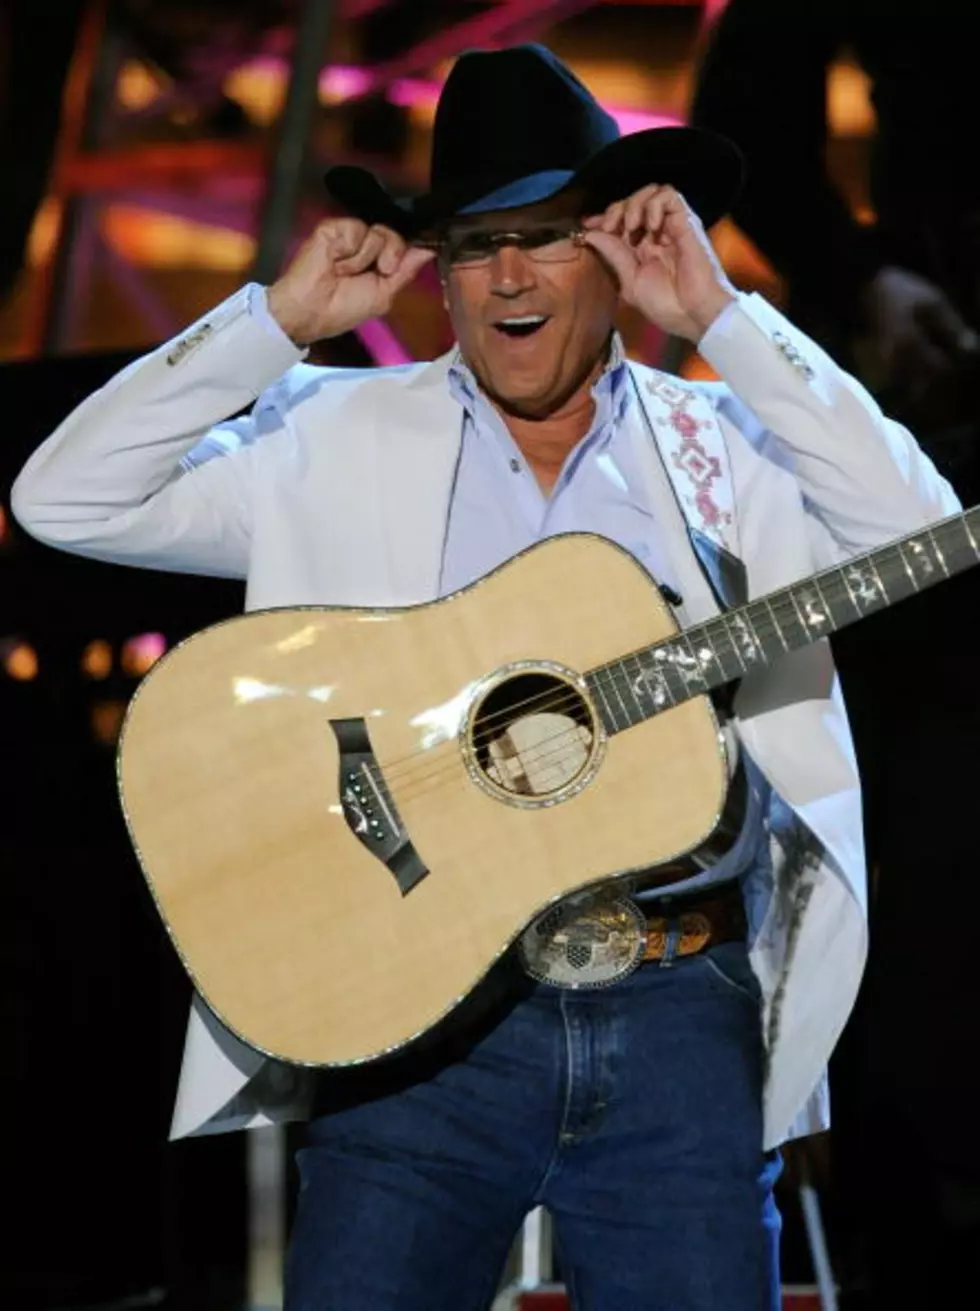 George Strait and Martina McBride On Tour Together in 2012